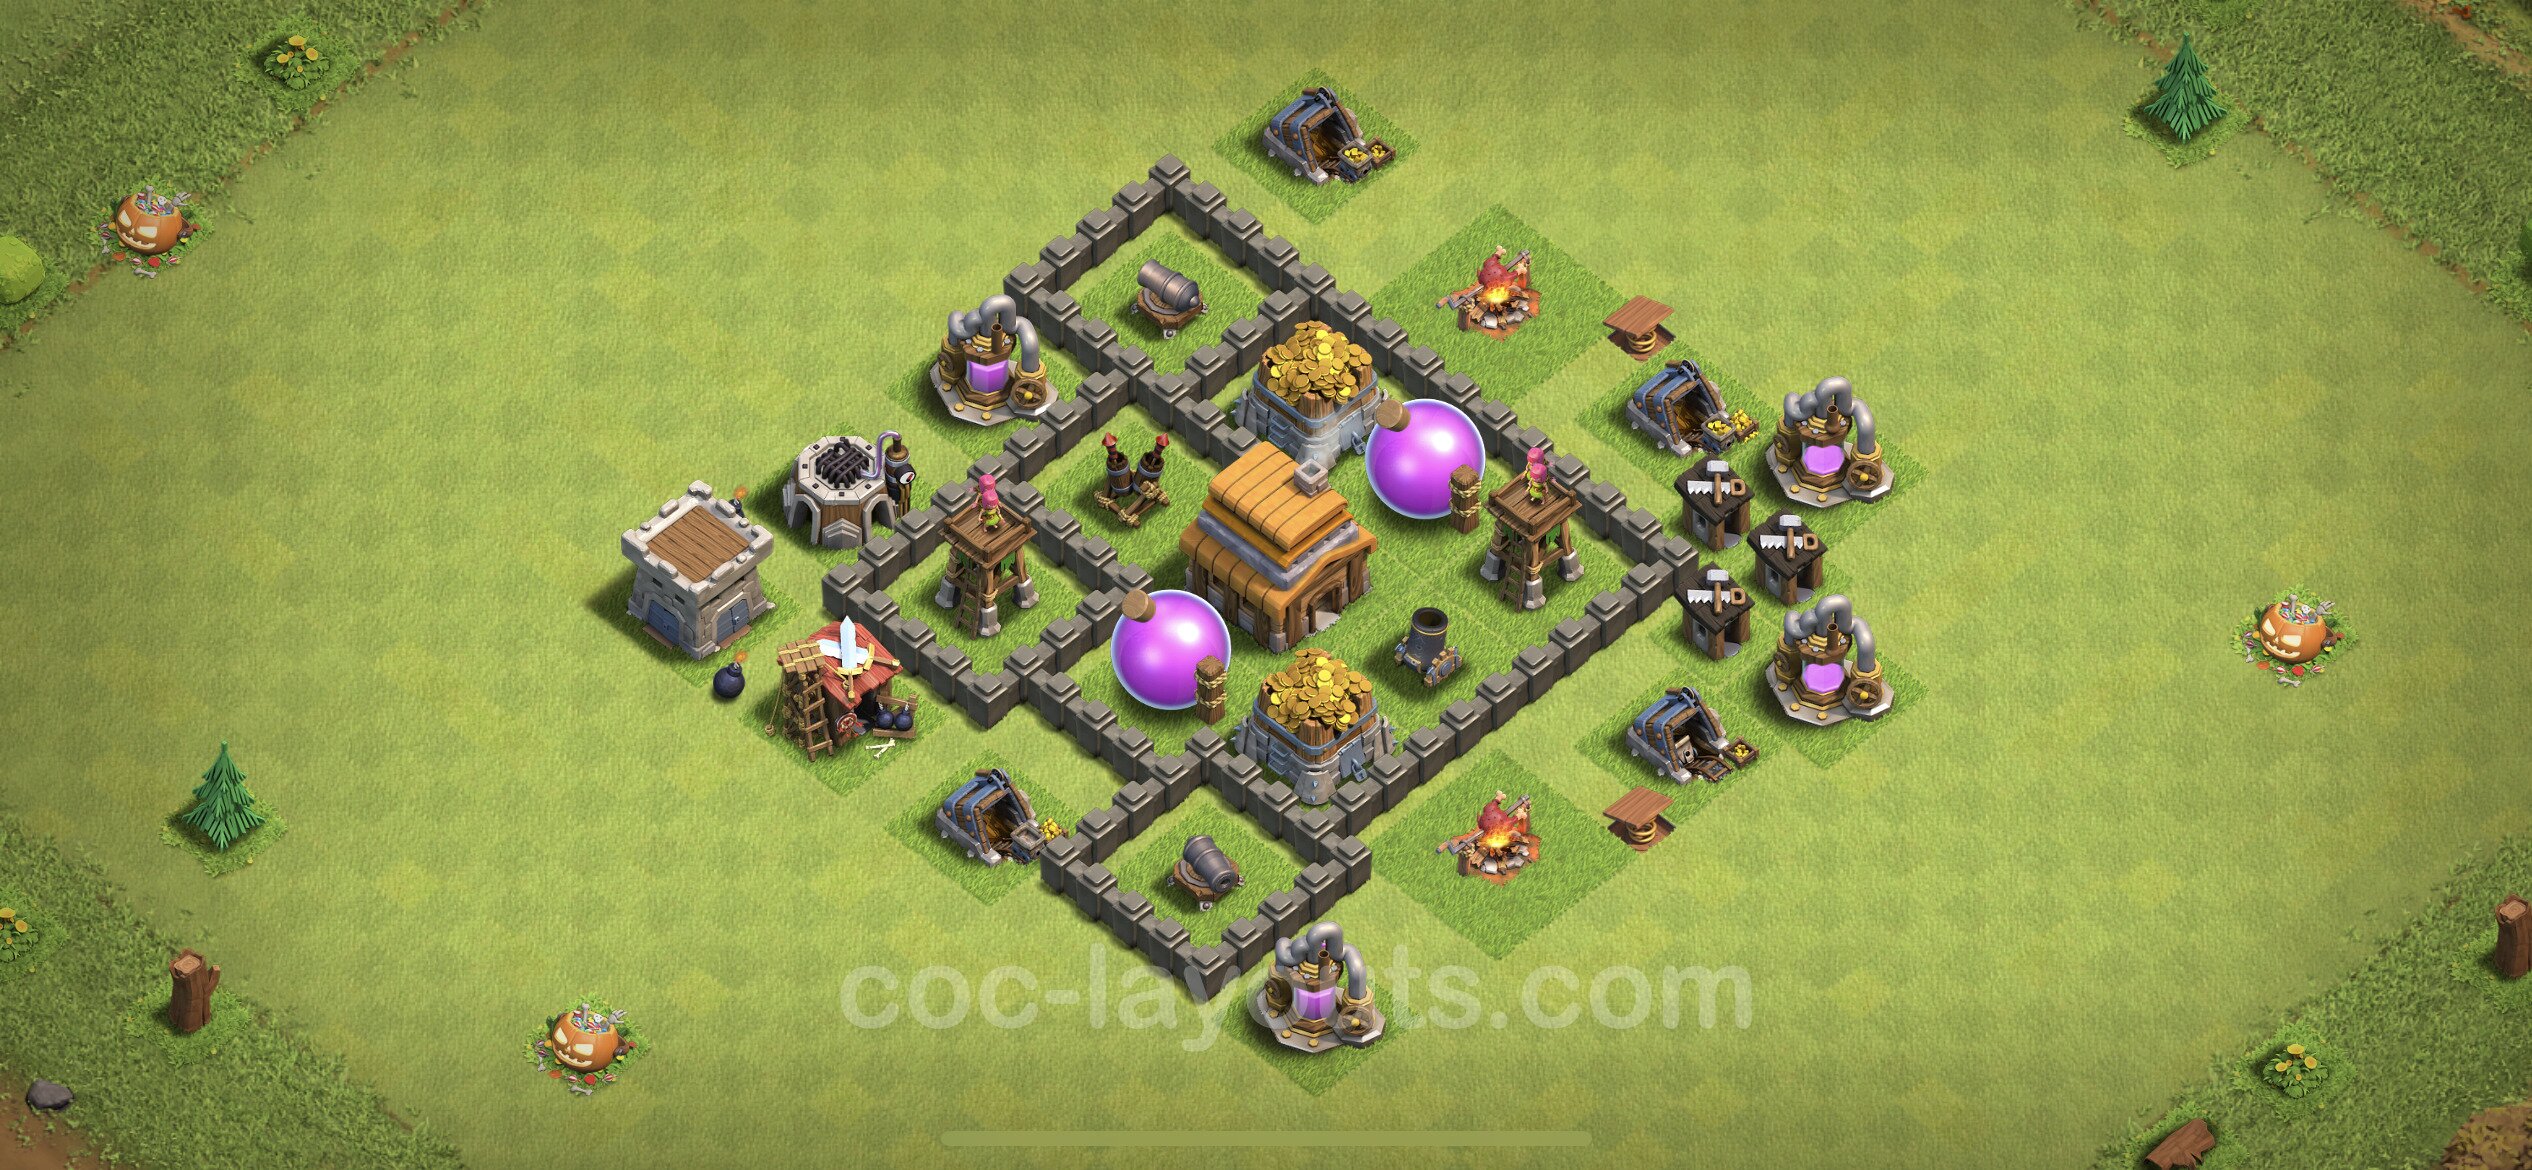 Farming Base TH4 with Link, Hybrid - plan / layout / design - Clash of Clan...